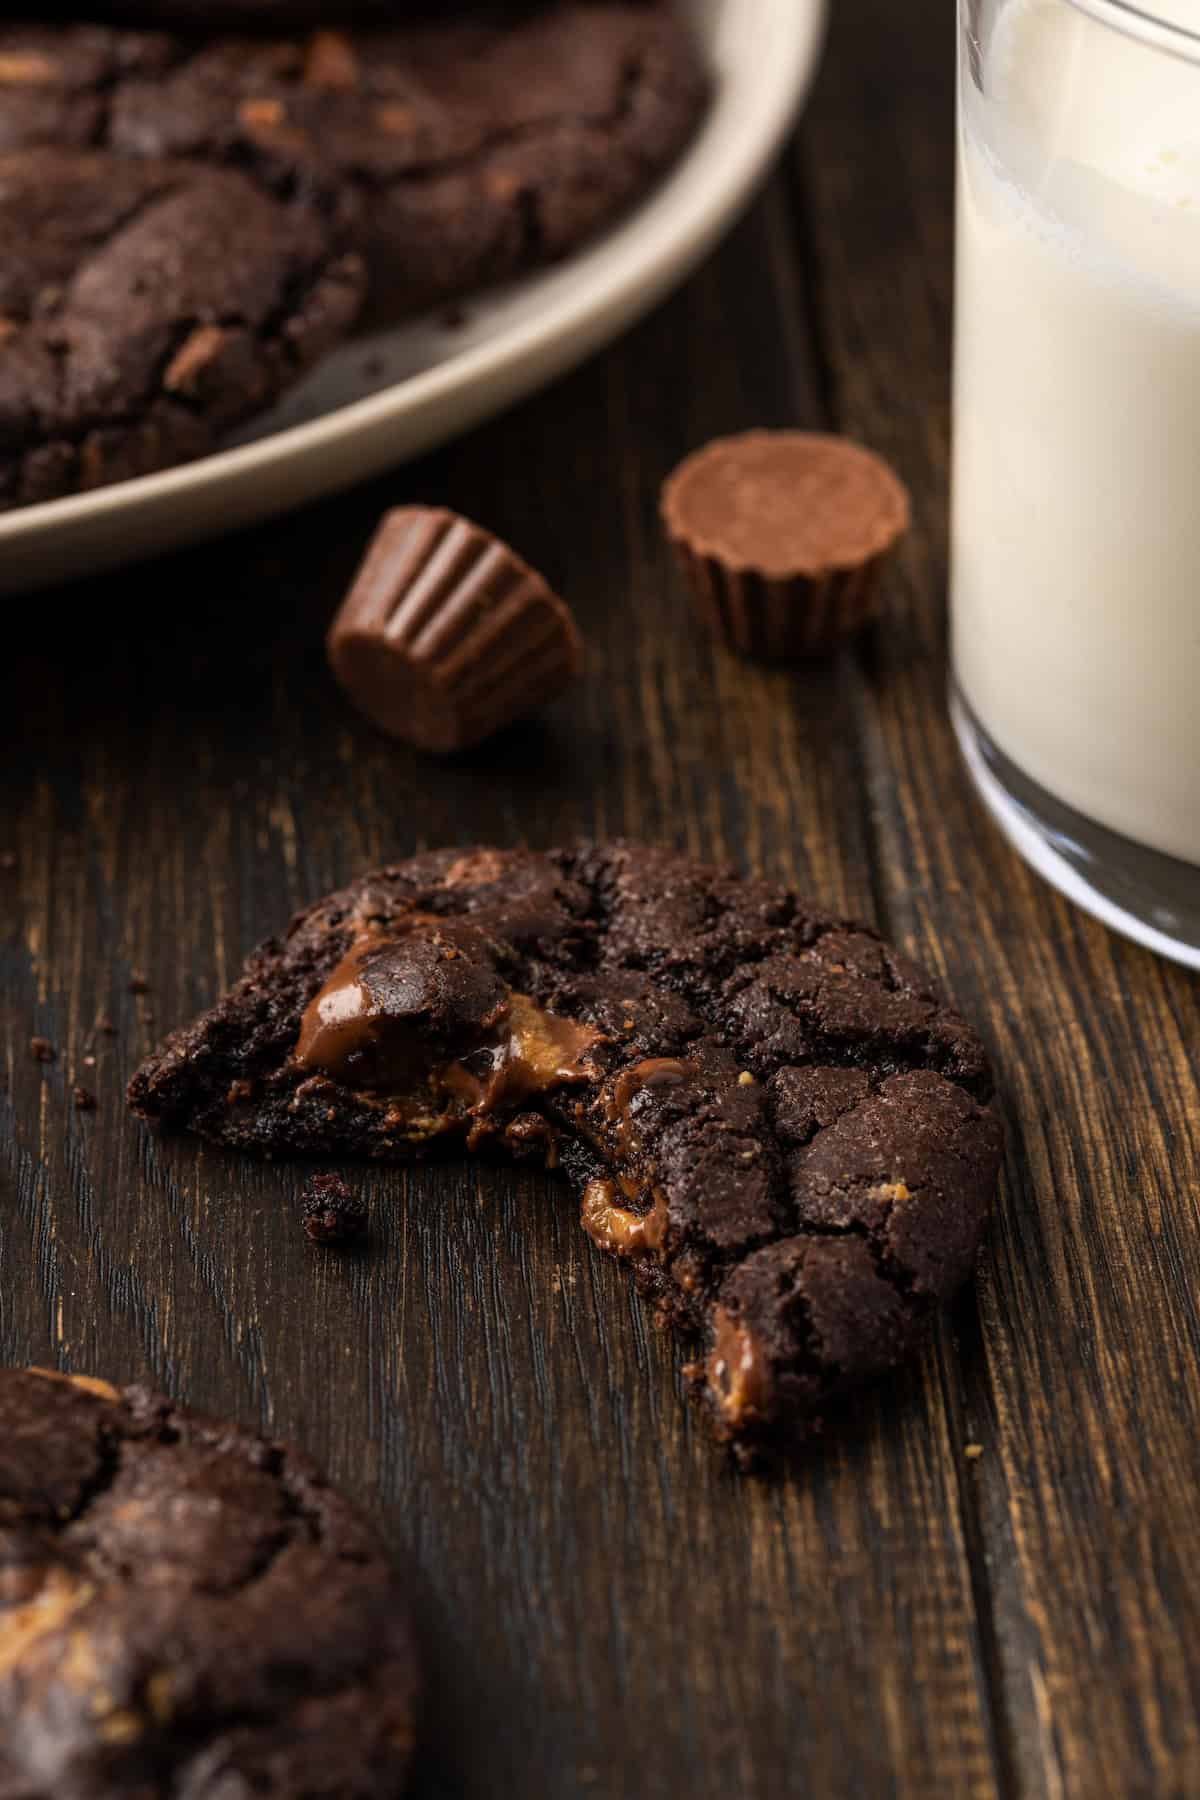 A peanut butter chocolate cookie with a bite missing on a wooden countertop, next to a plate of cookies and a glass of milk.